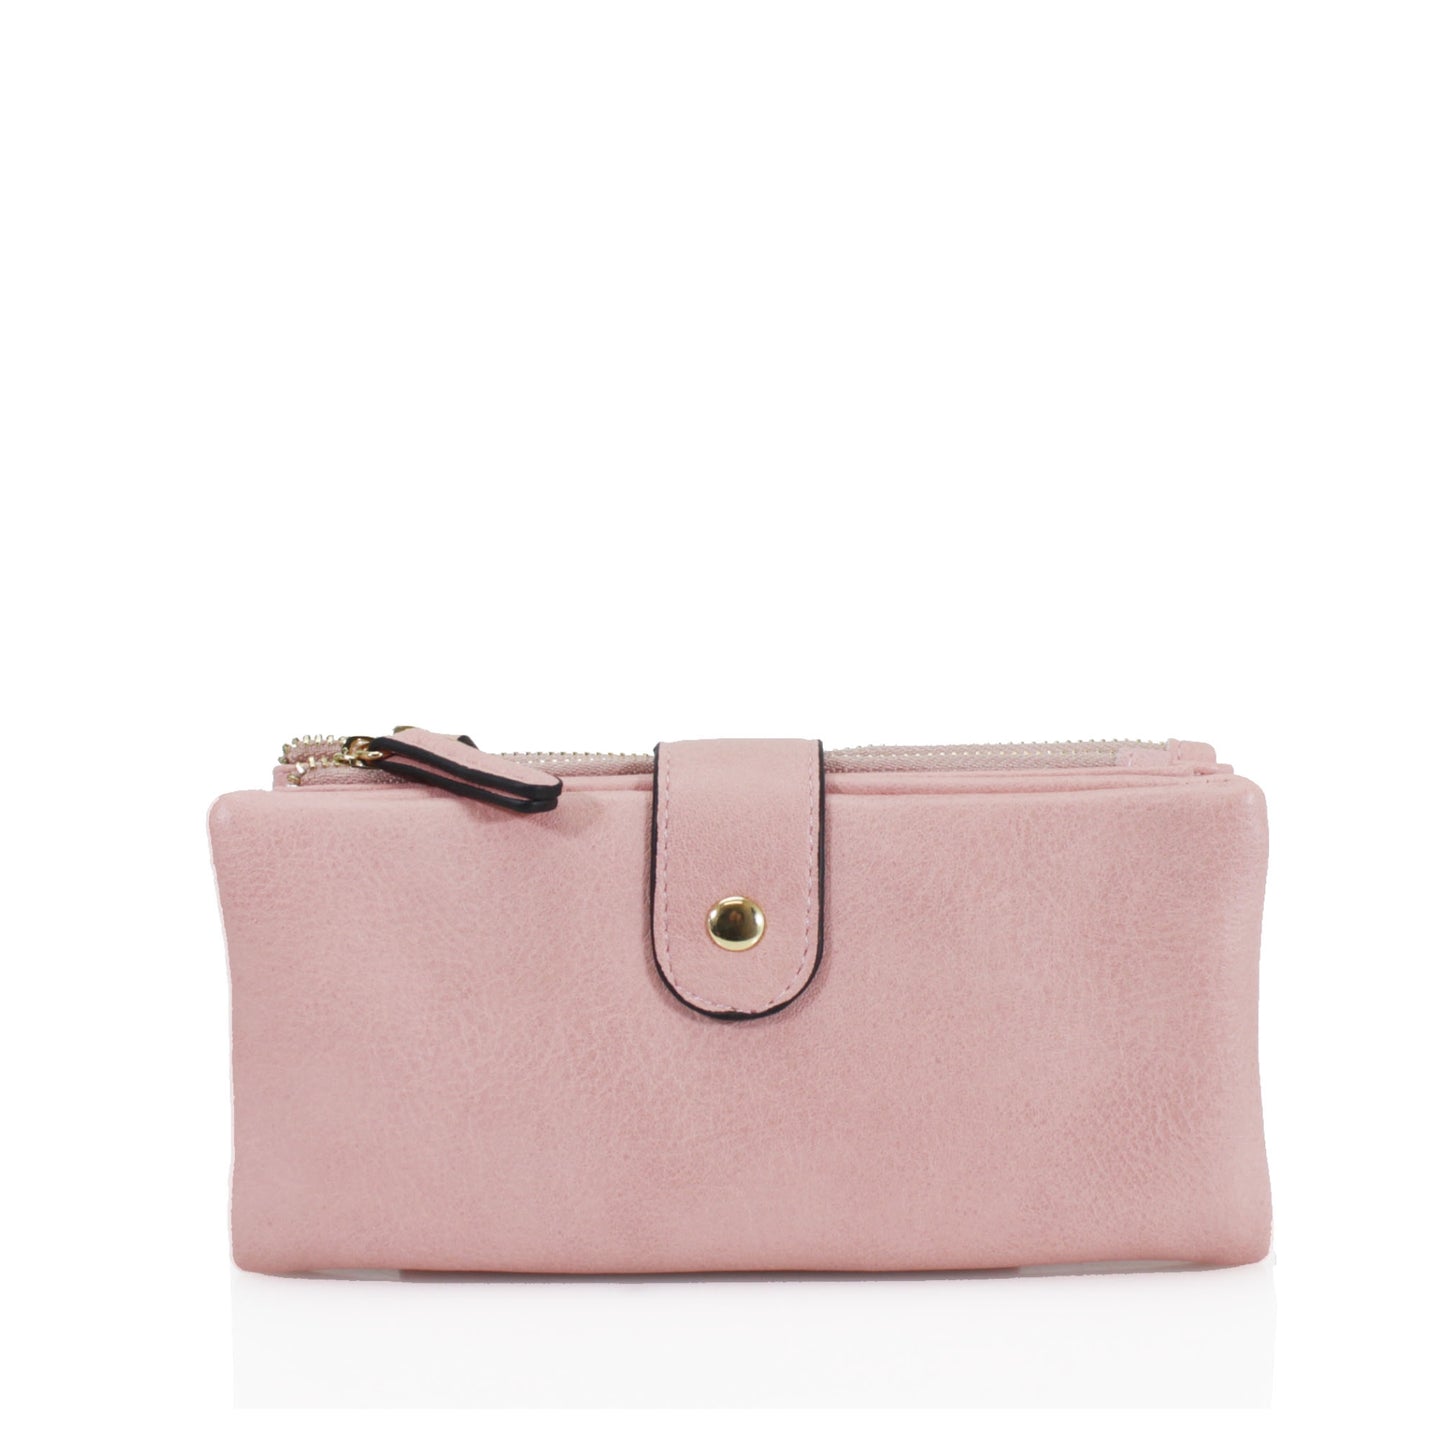 Double zipped purse - Variety of colours